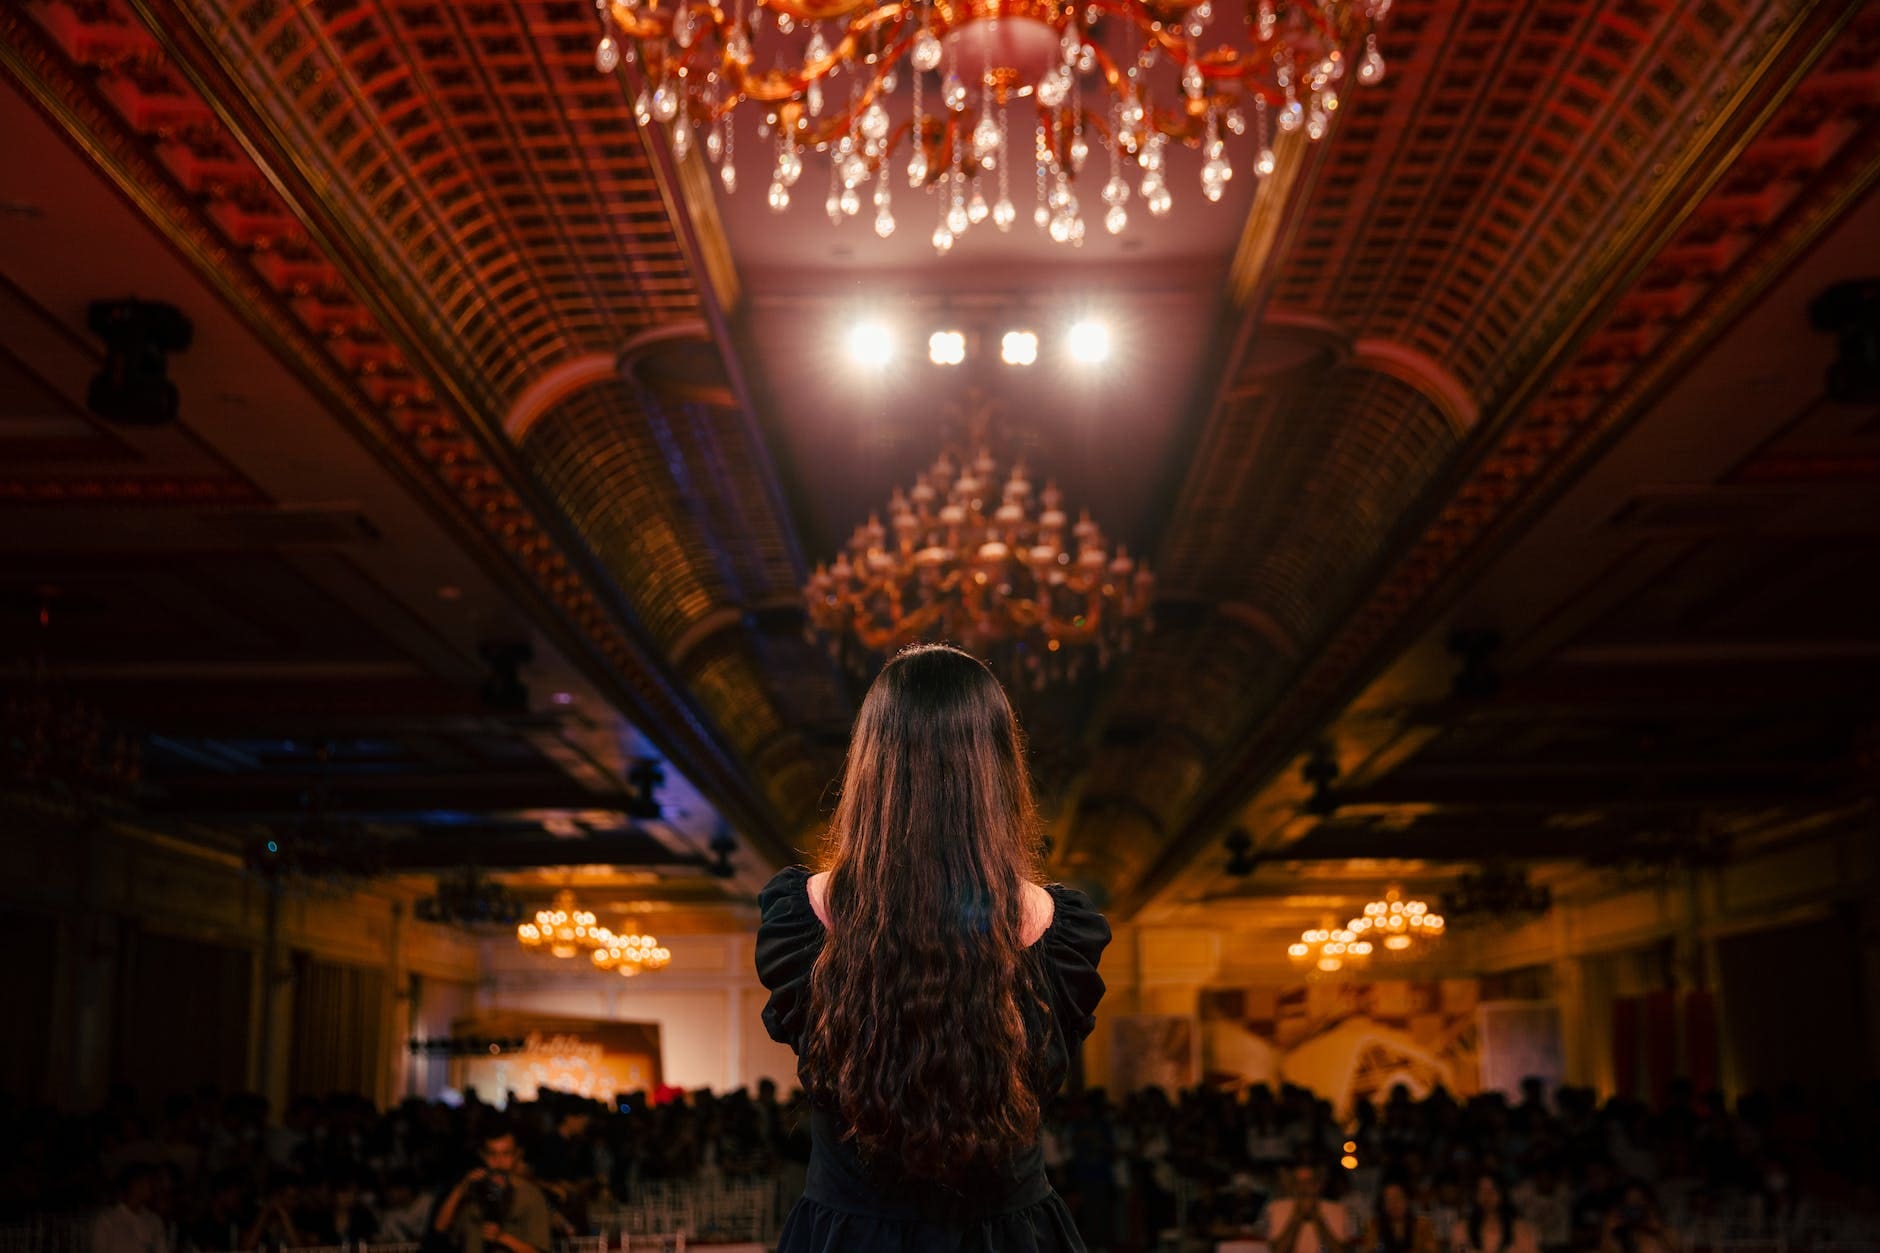 a woman standing in a large room with chandeliers